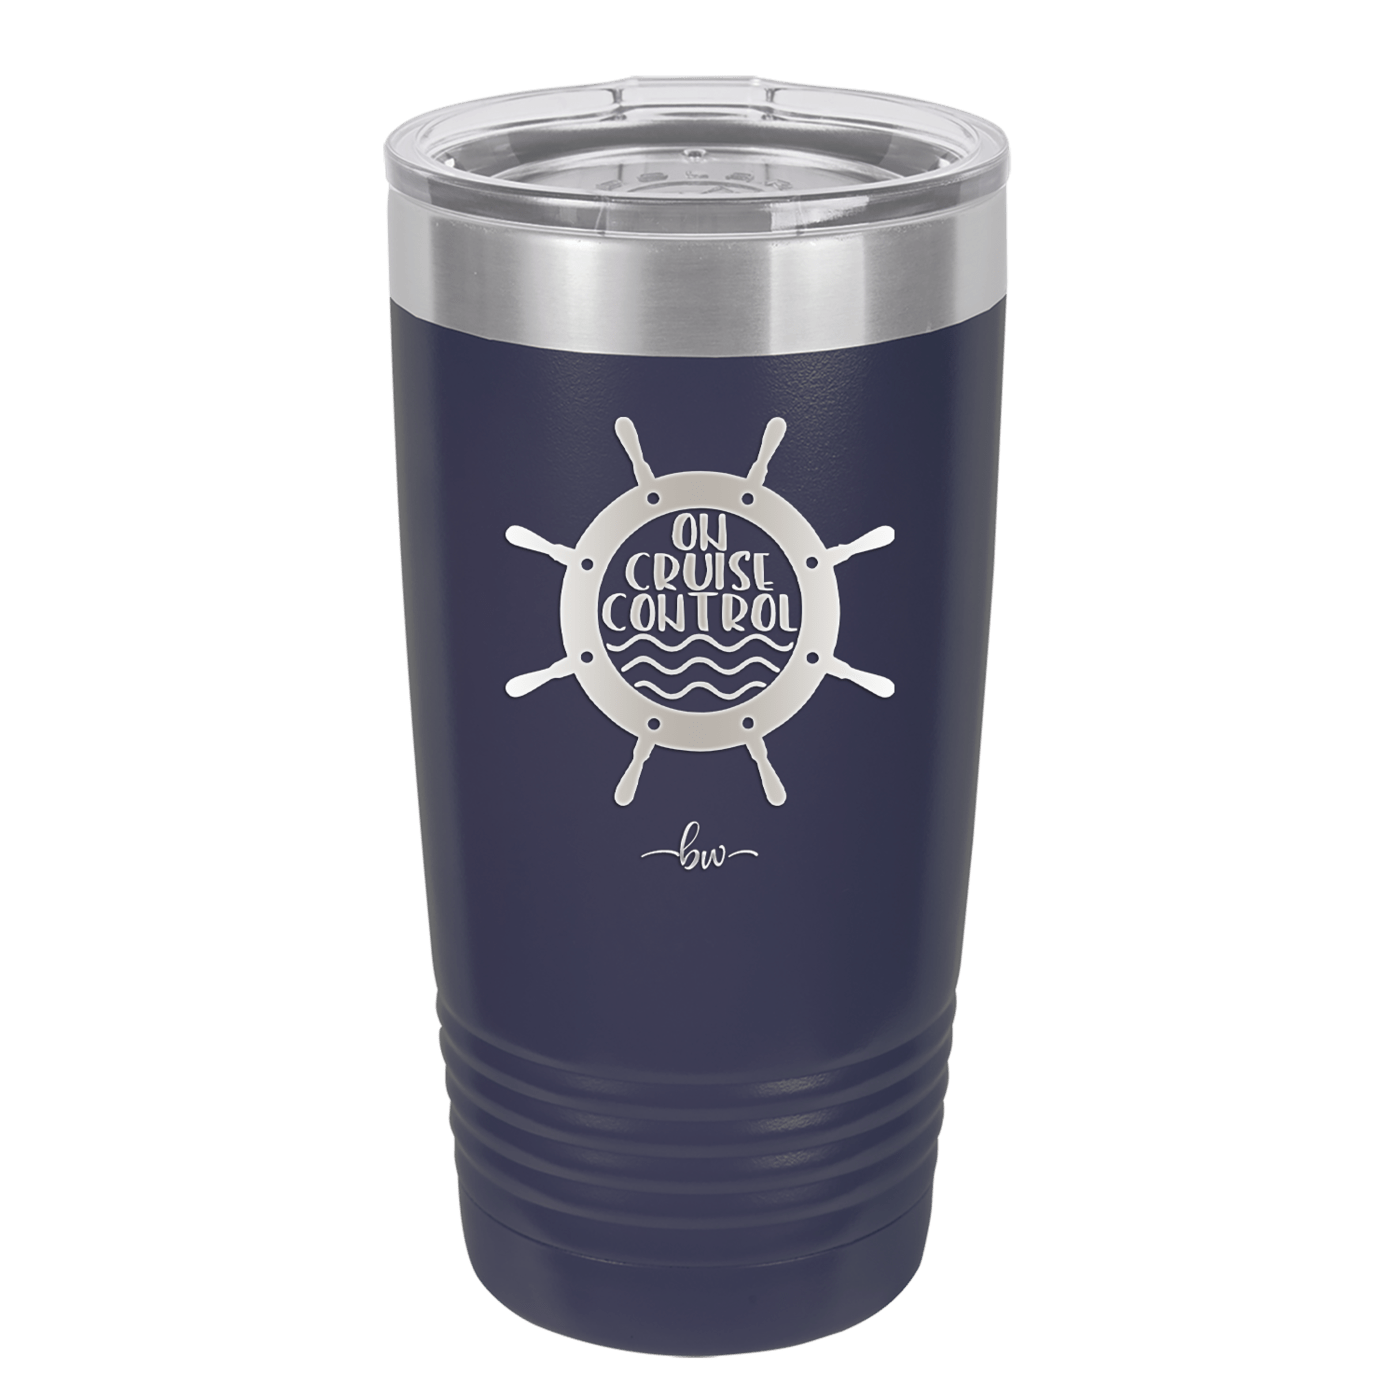 On Cruise Control Ships Wheel - Laser Engraved Stainless Steel Drinkware - 1432 -